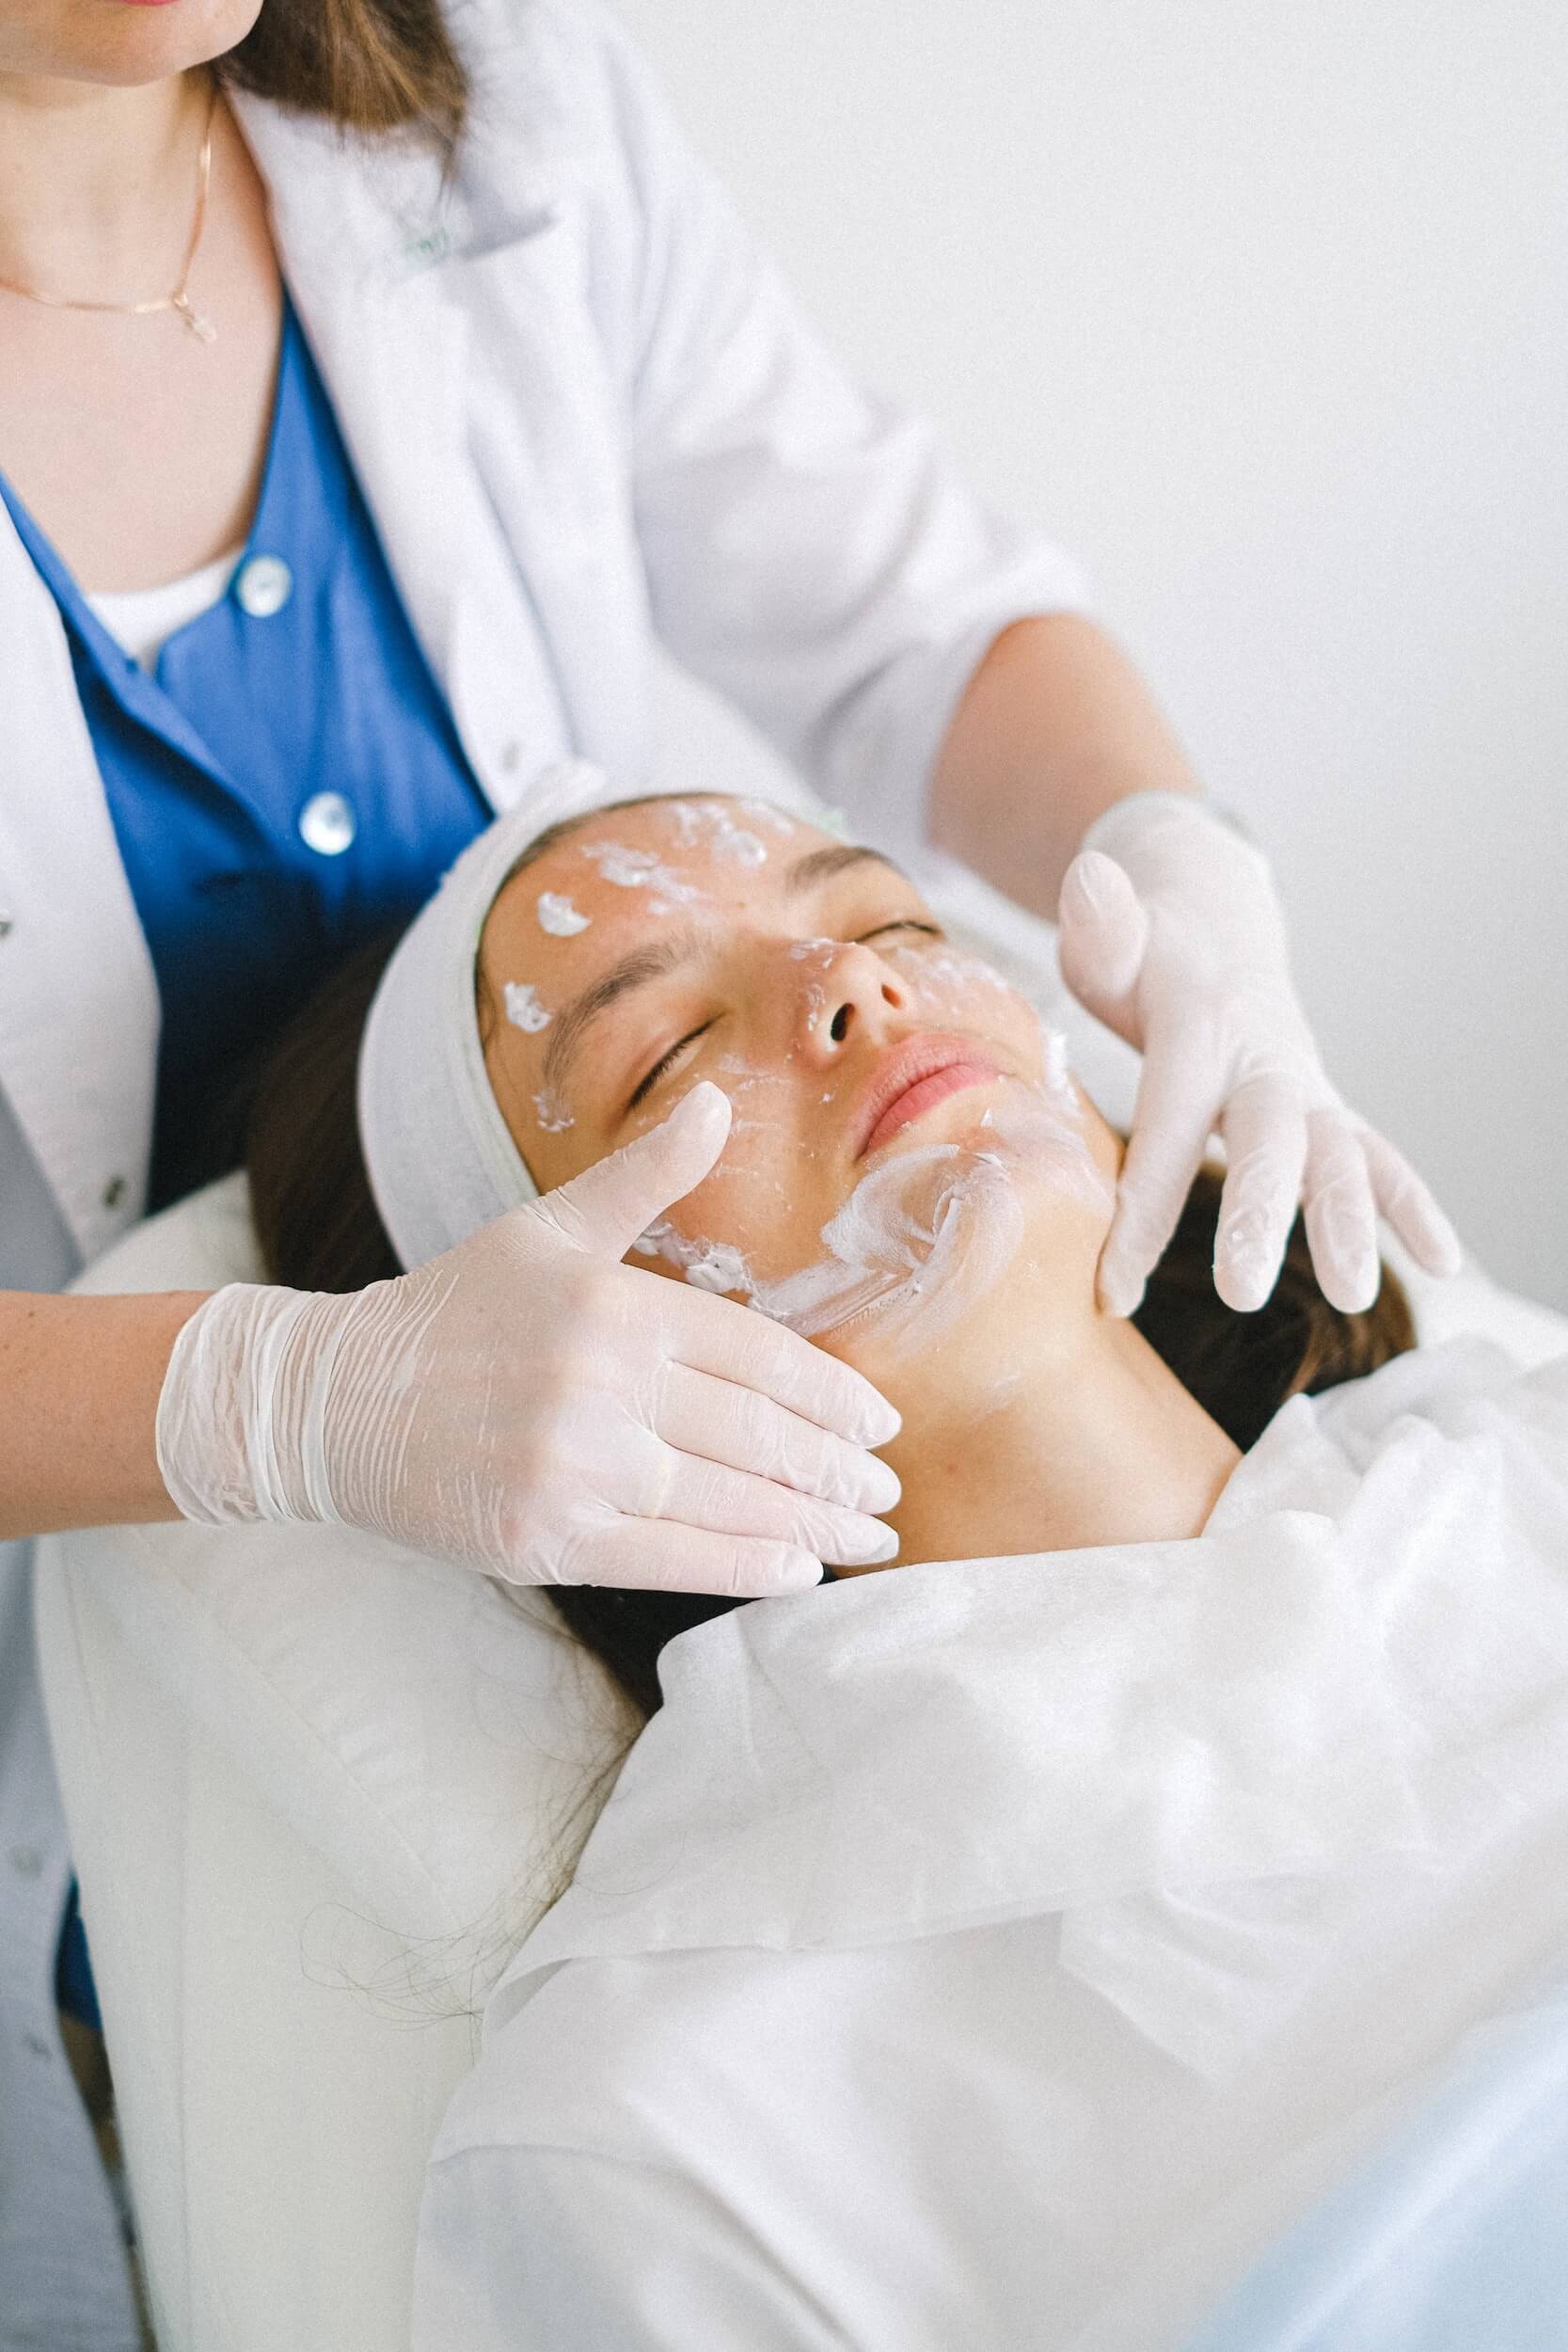 A woman lays on her back on a treatment table while a professional in latex gloves gently rubs lotion on her face to provide a natural skin therapy that will result in wrinkle reduction.